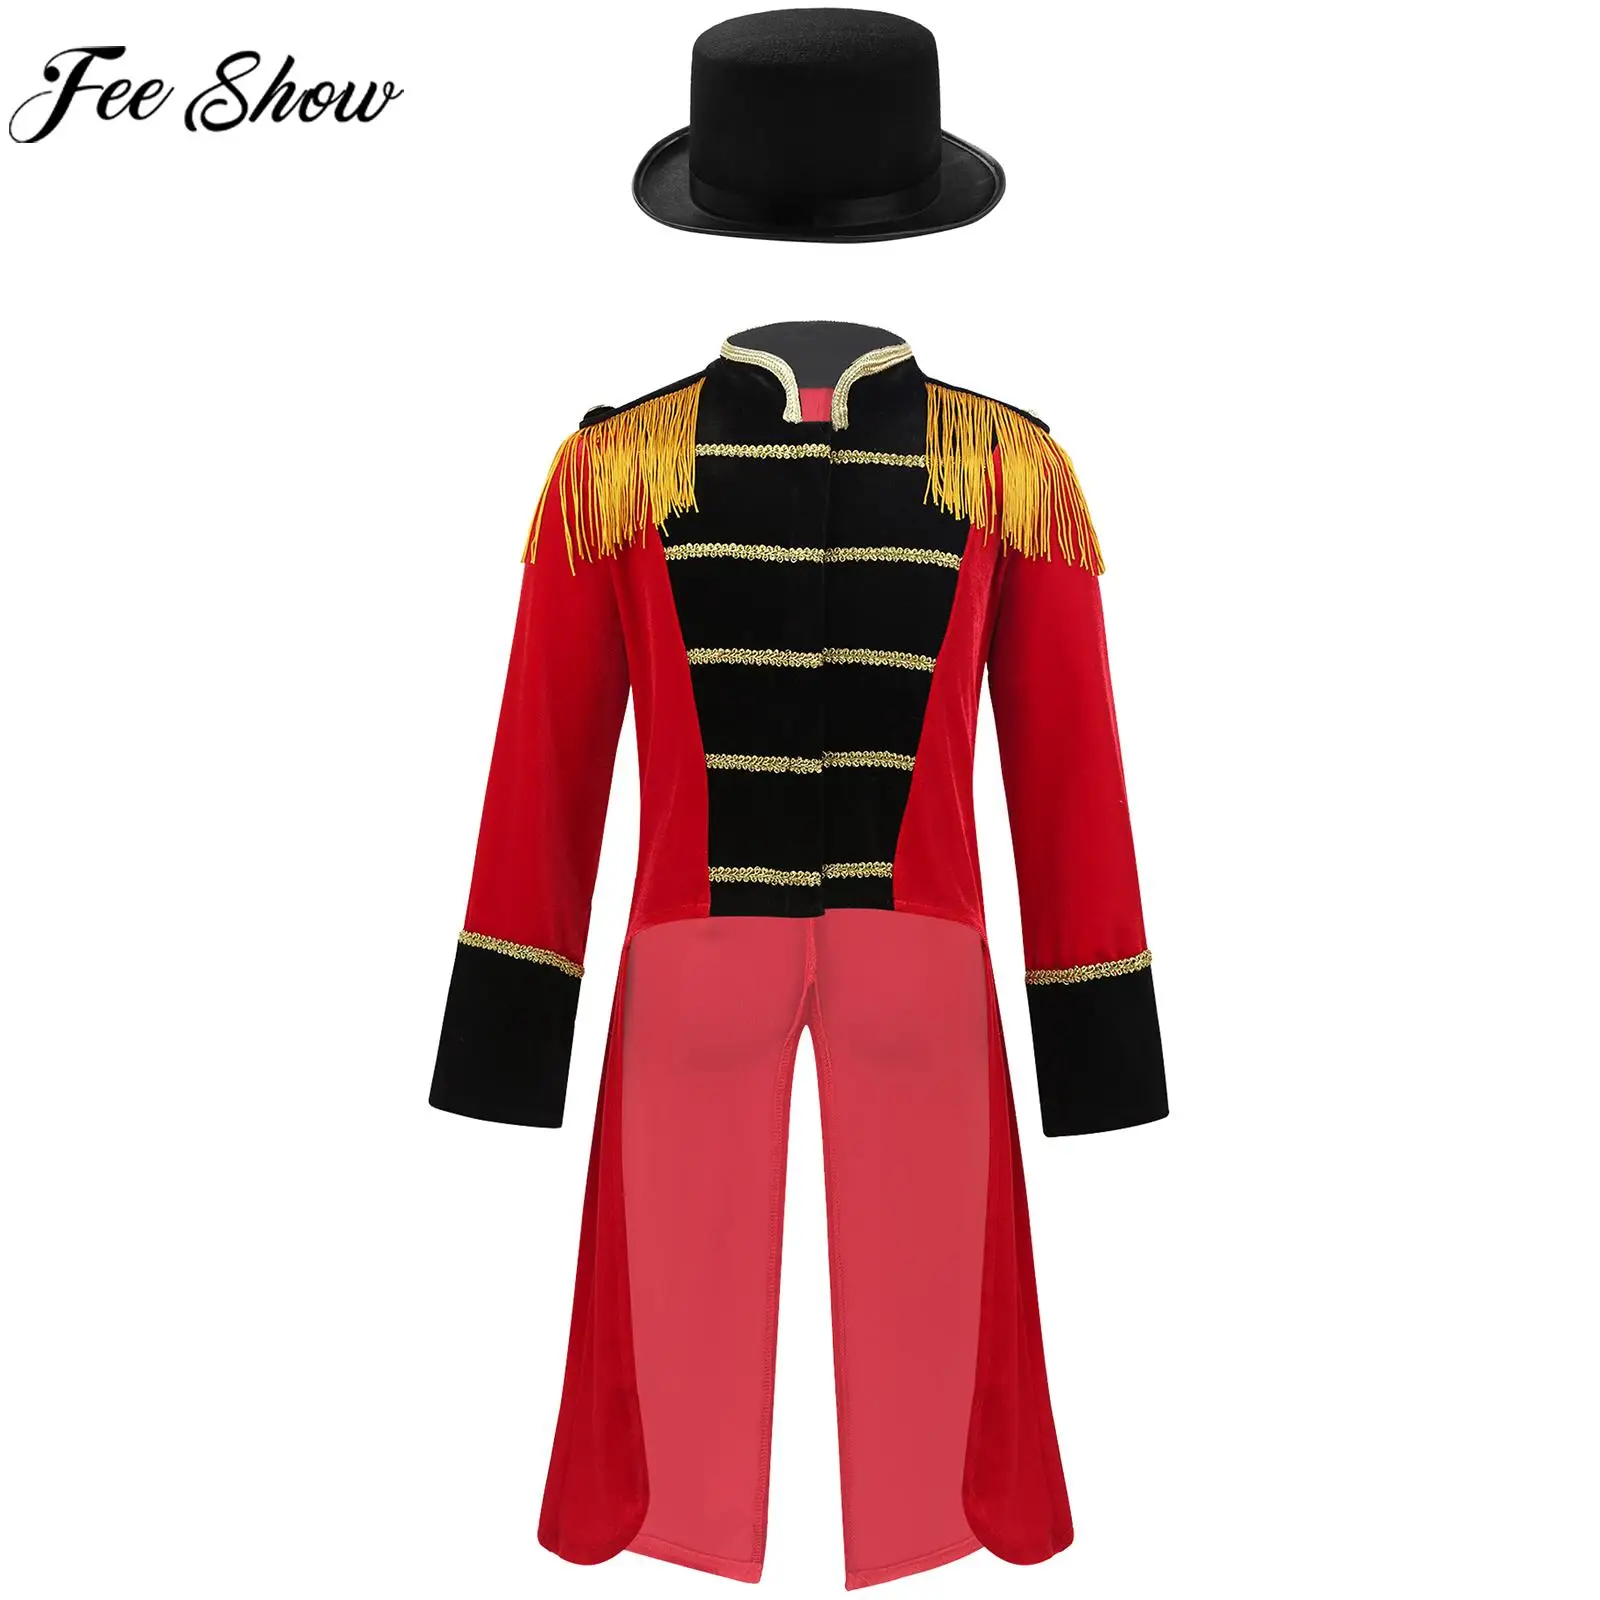 

Boy Circus Ringmaster Cosplay Costume Halloween Theme Party Magician Dress Up Coat Long Sleeve Tassel Tailcoat with Felt Hat